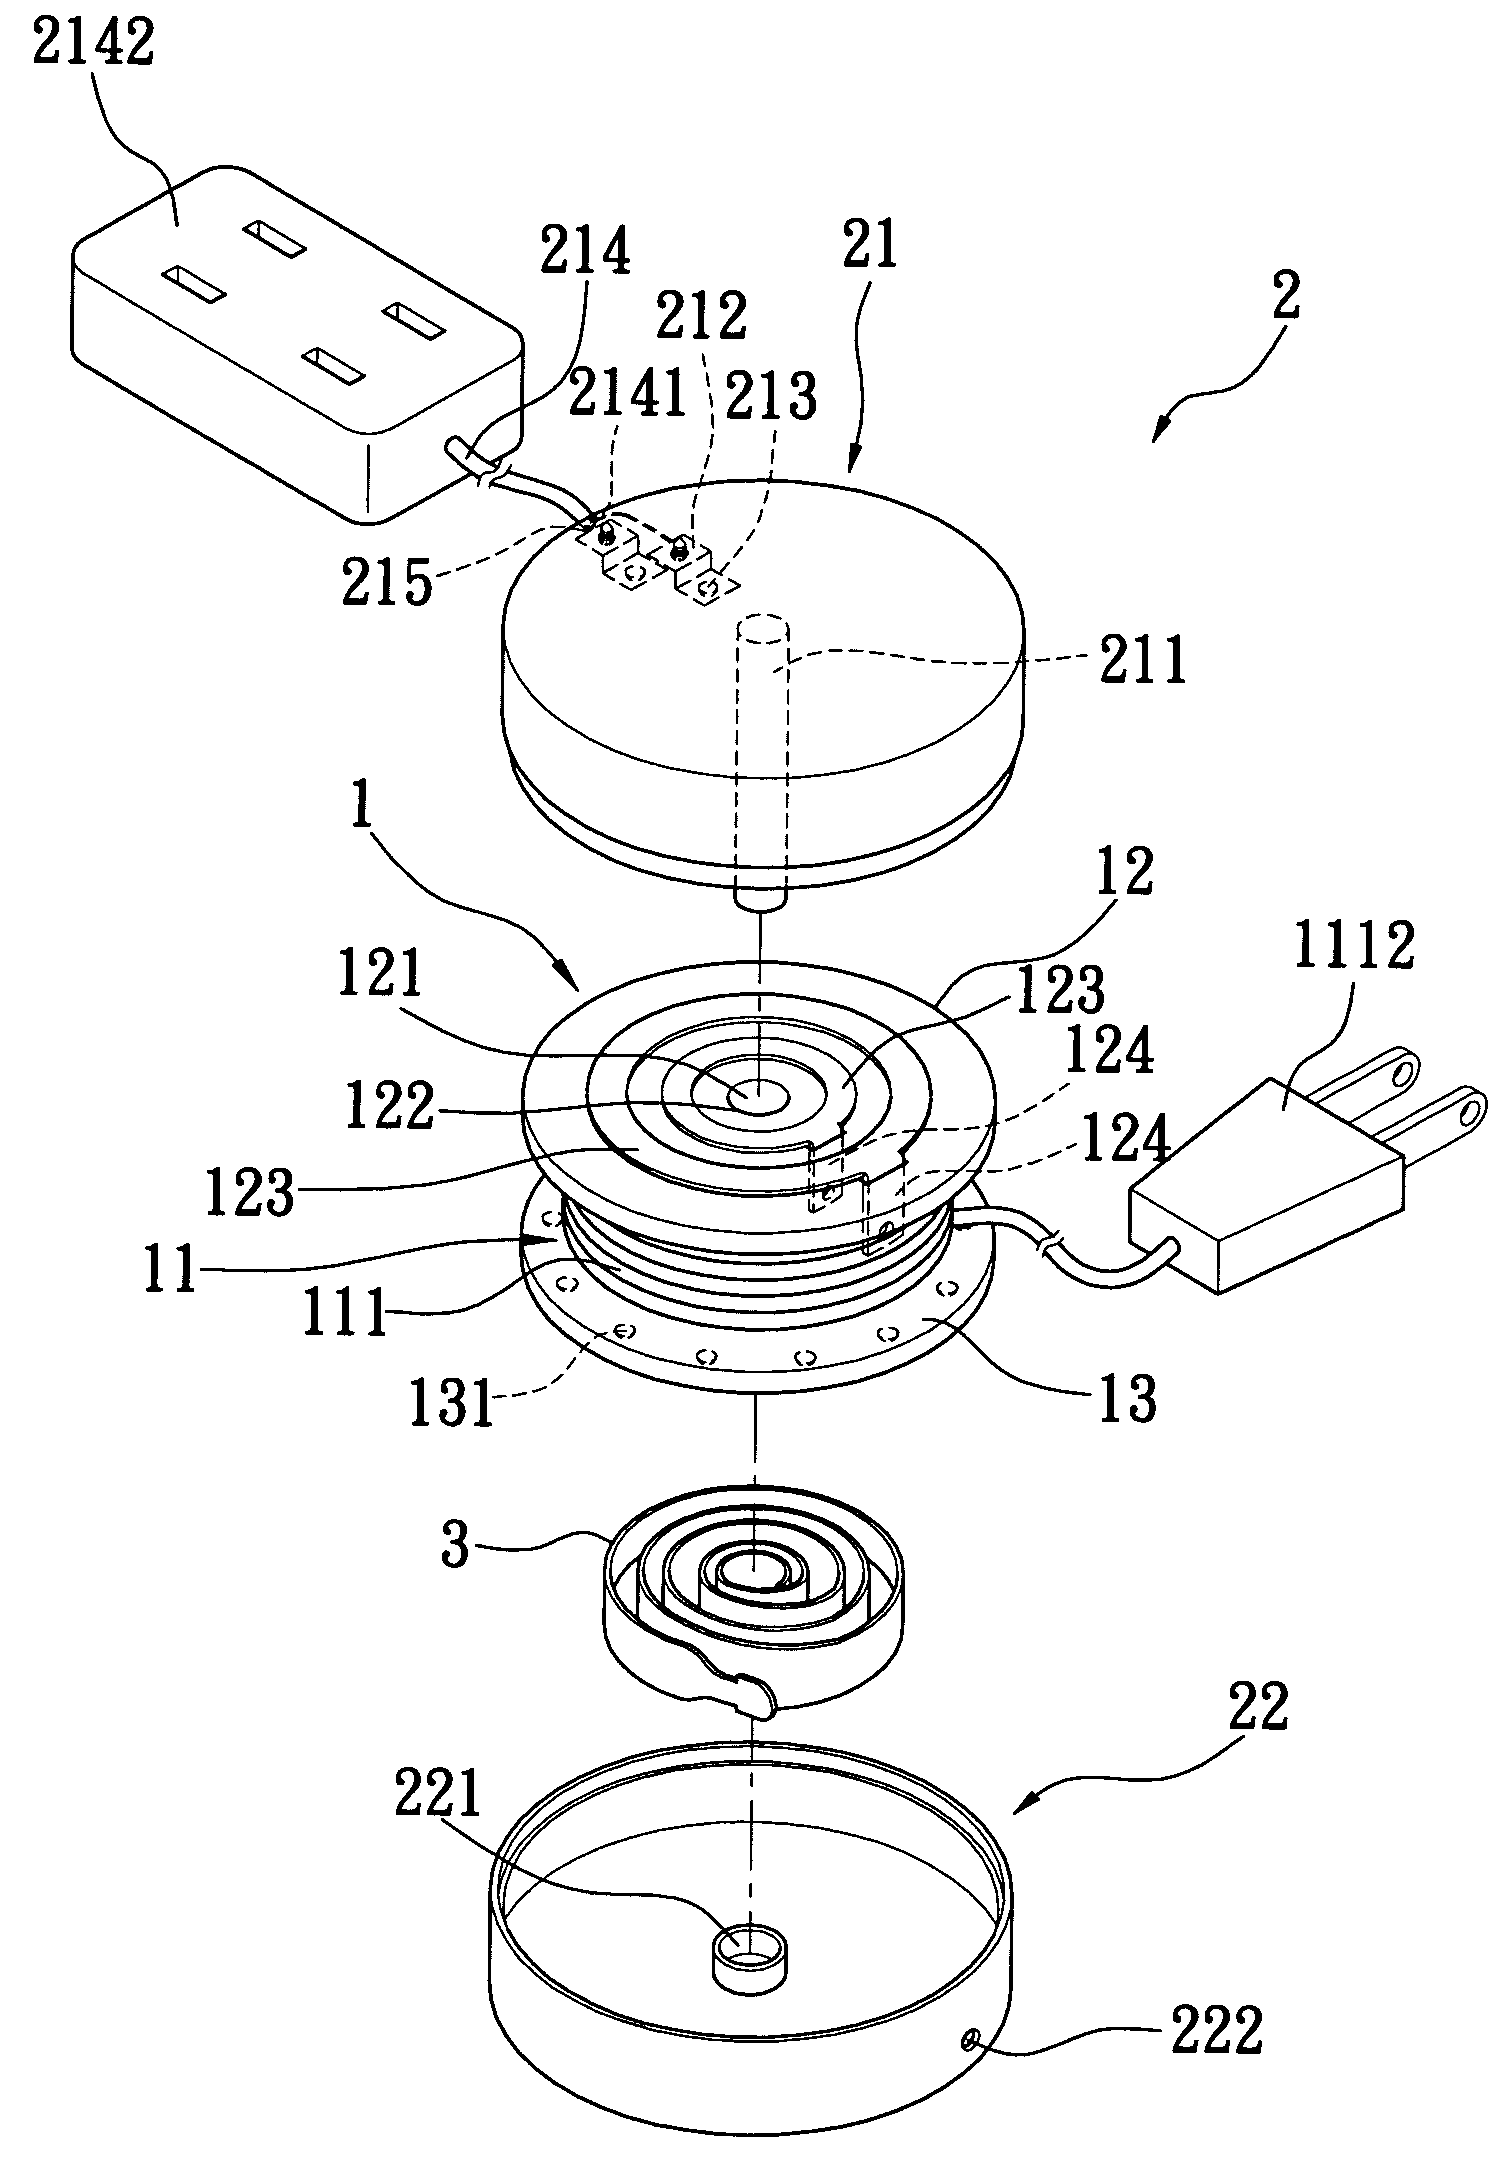 Power cord winding and releasing device